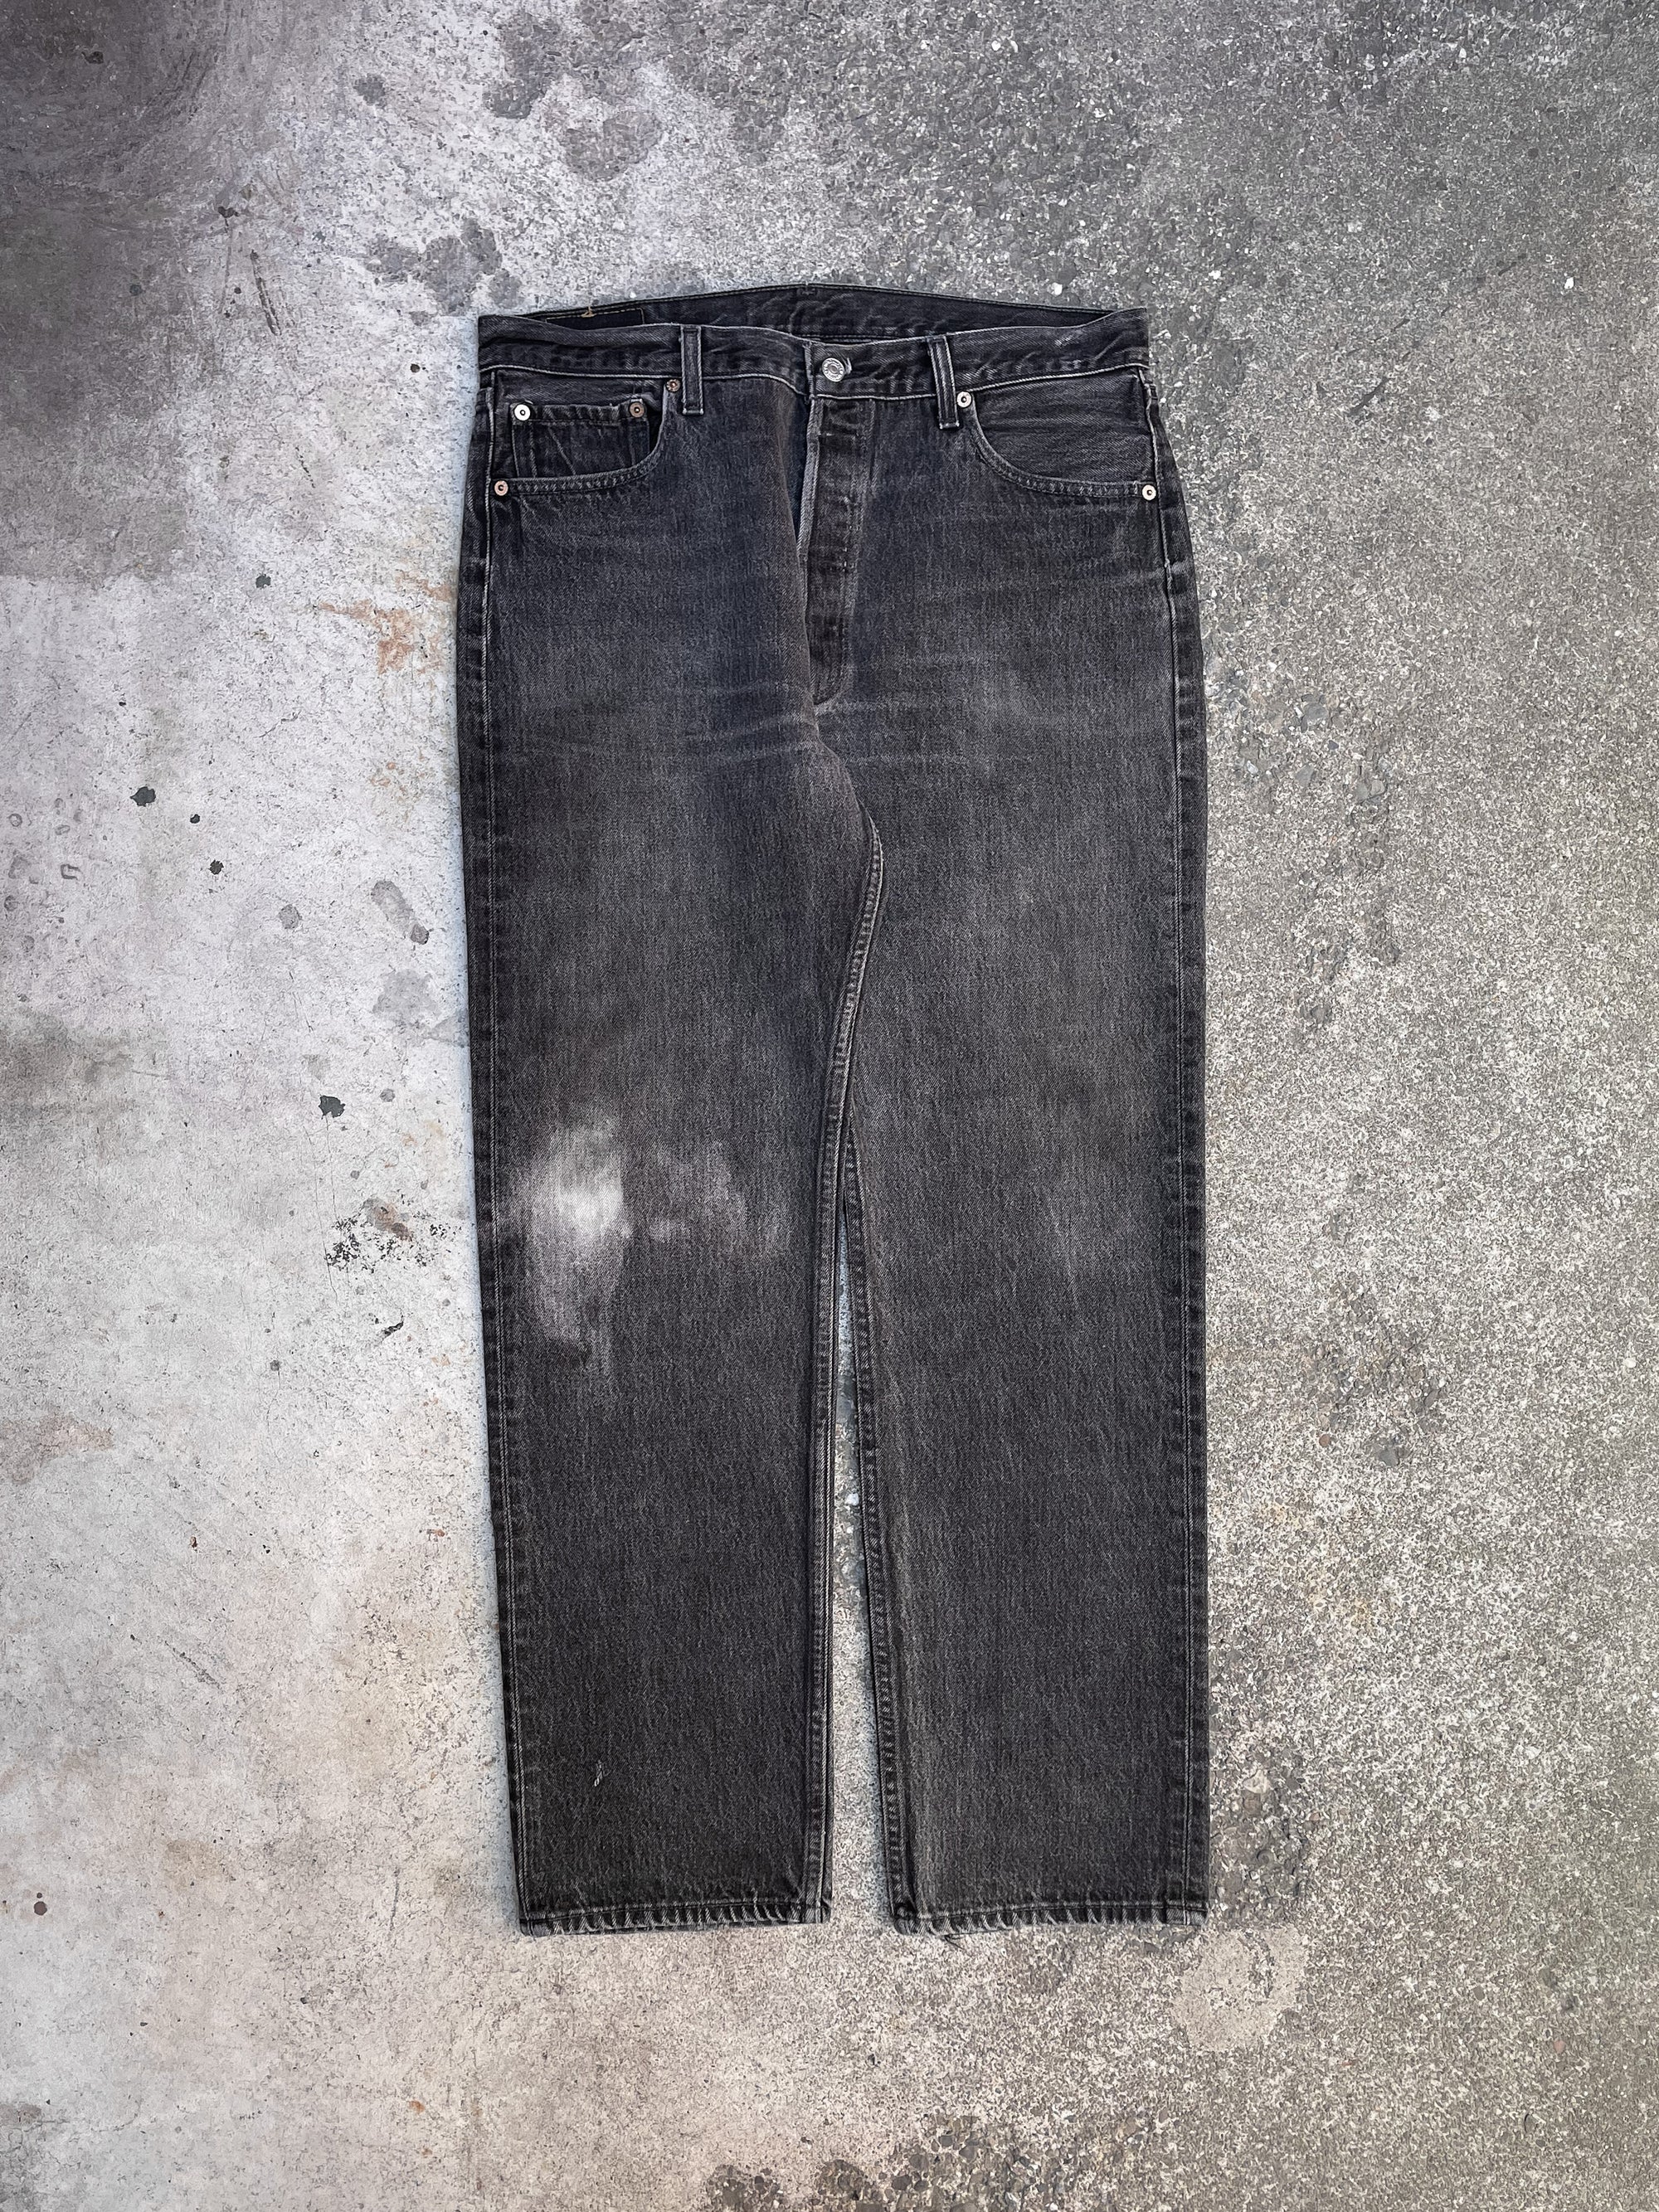 1990s Levi’s Repaired Faded Black 501 (34X31)